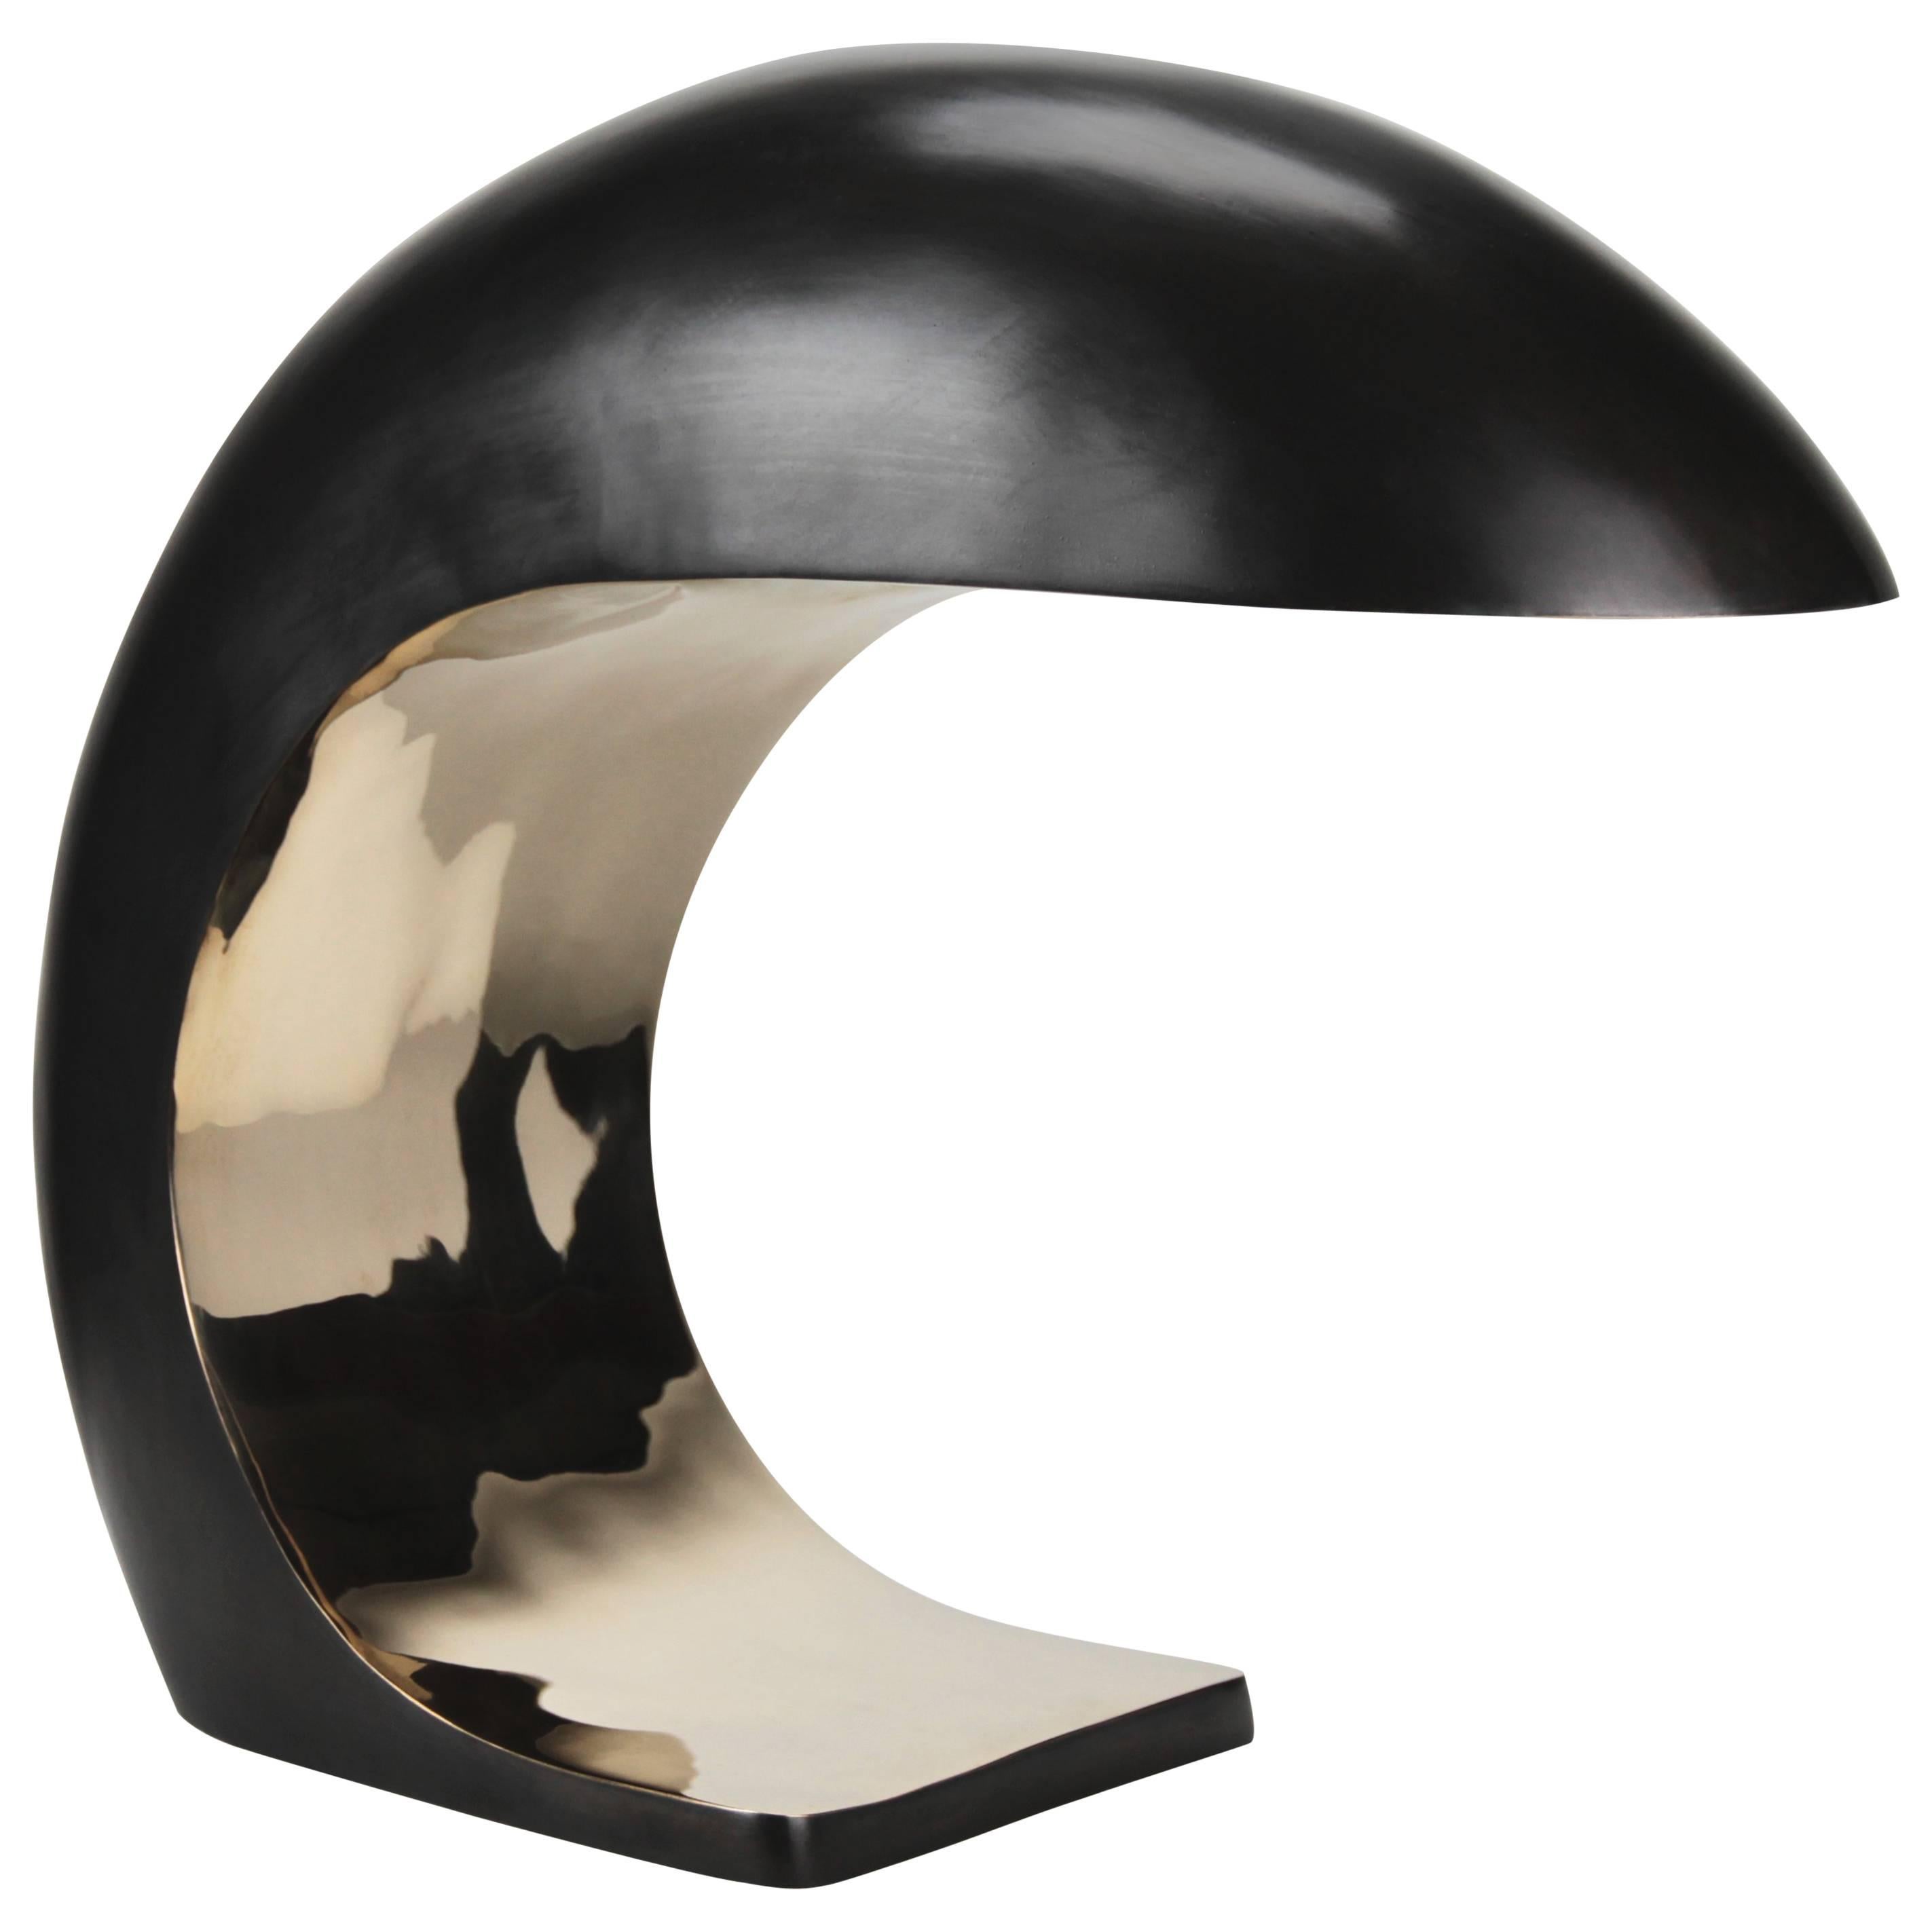 The Nautilus lamp in lamp is inspired by midcentury Italian design.
It is cast bronze and weighs up to 28 to 30 lbs. The outer shell has a blackened patina and the face is high polished to a mirrored finish and waxed.
 
The Nautilus illuminates by a